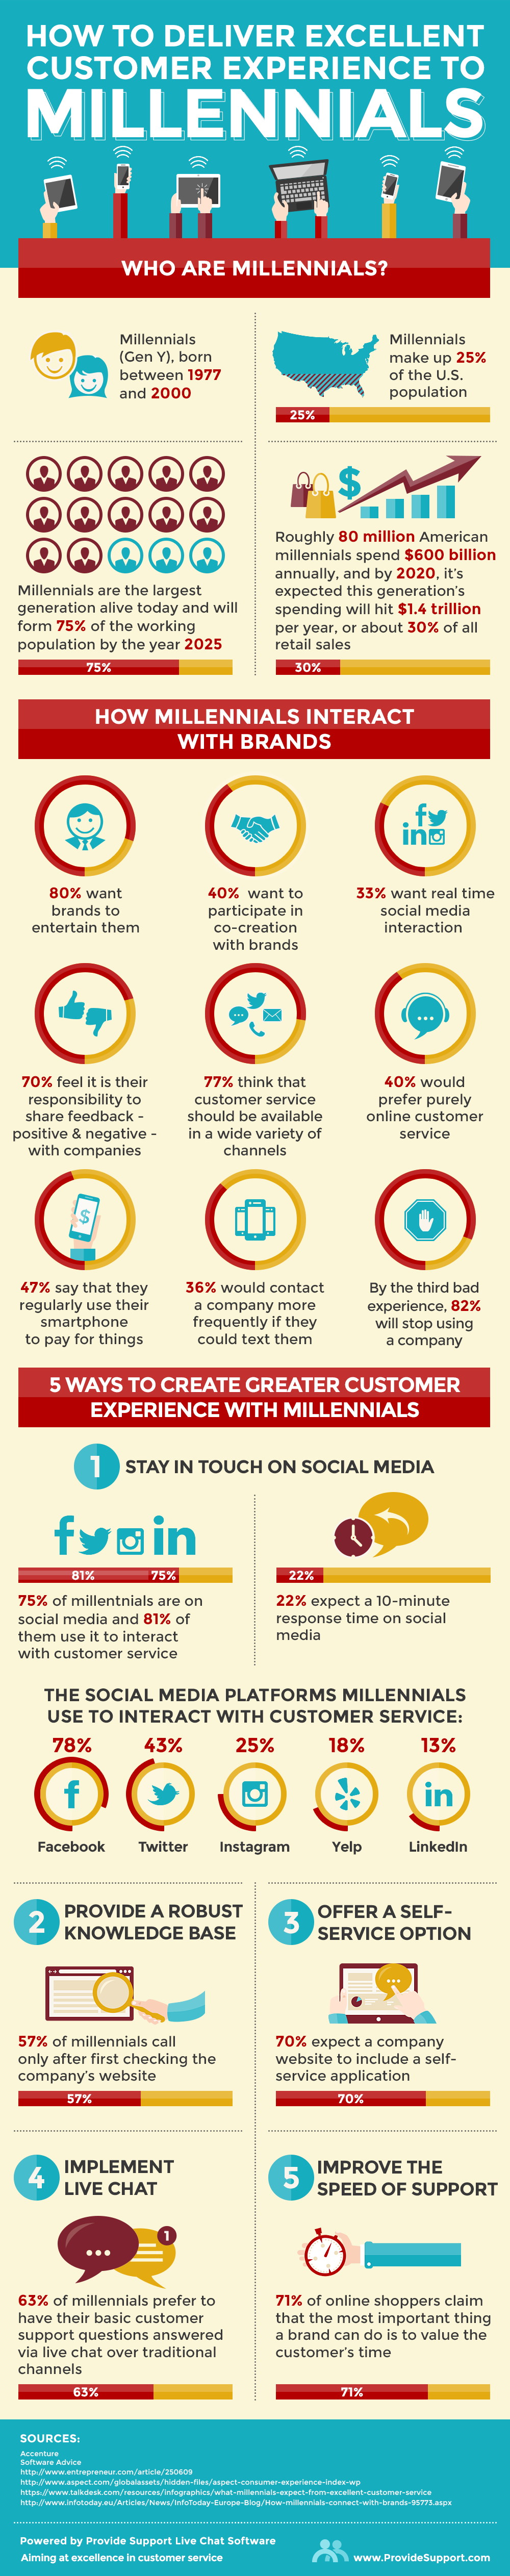 How to Deliver Excellent Customer Experience to Millennials